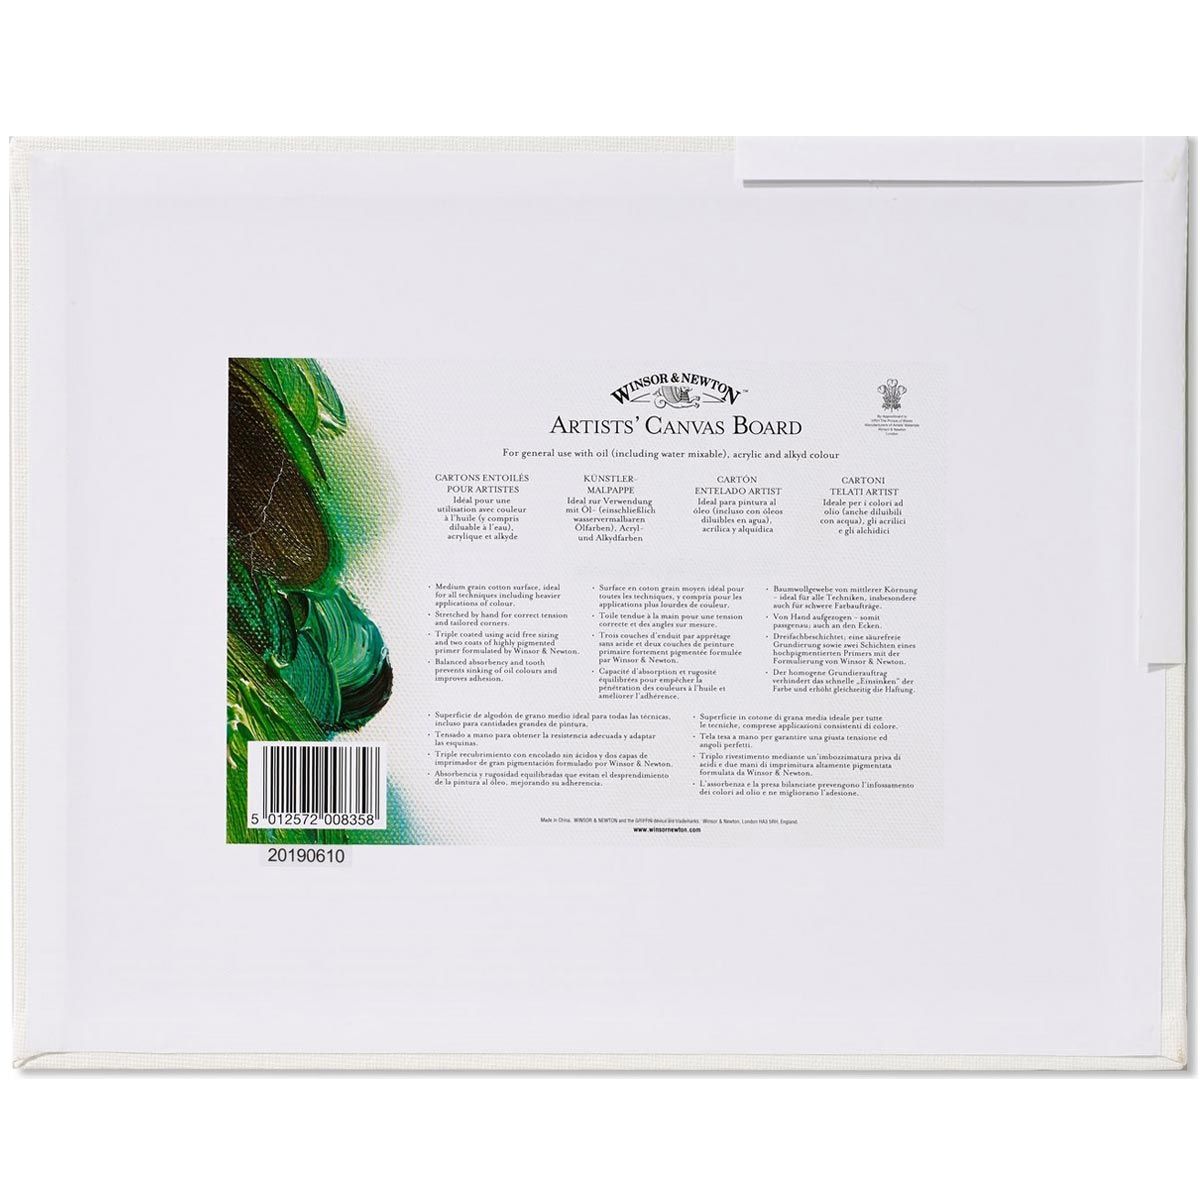 Winsor & Newton Artists' Quality Canvas Board 11 x 14 inches